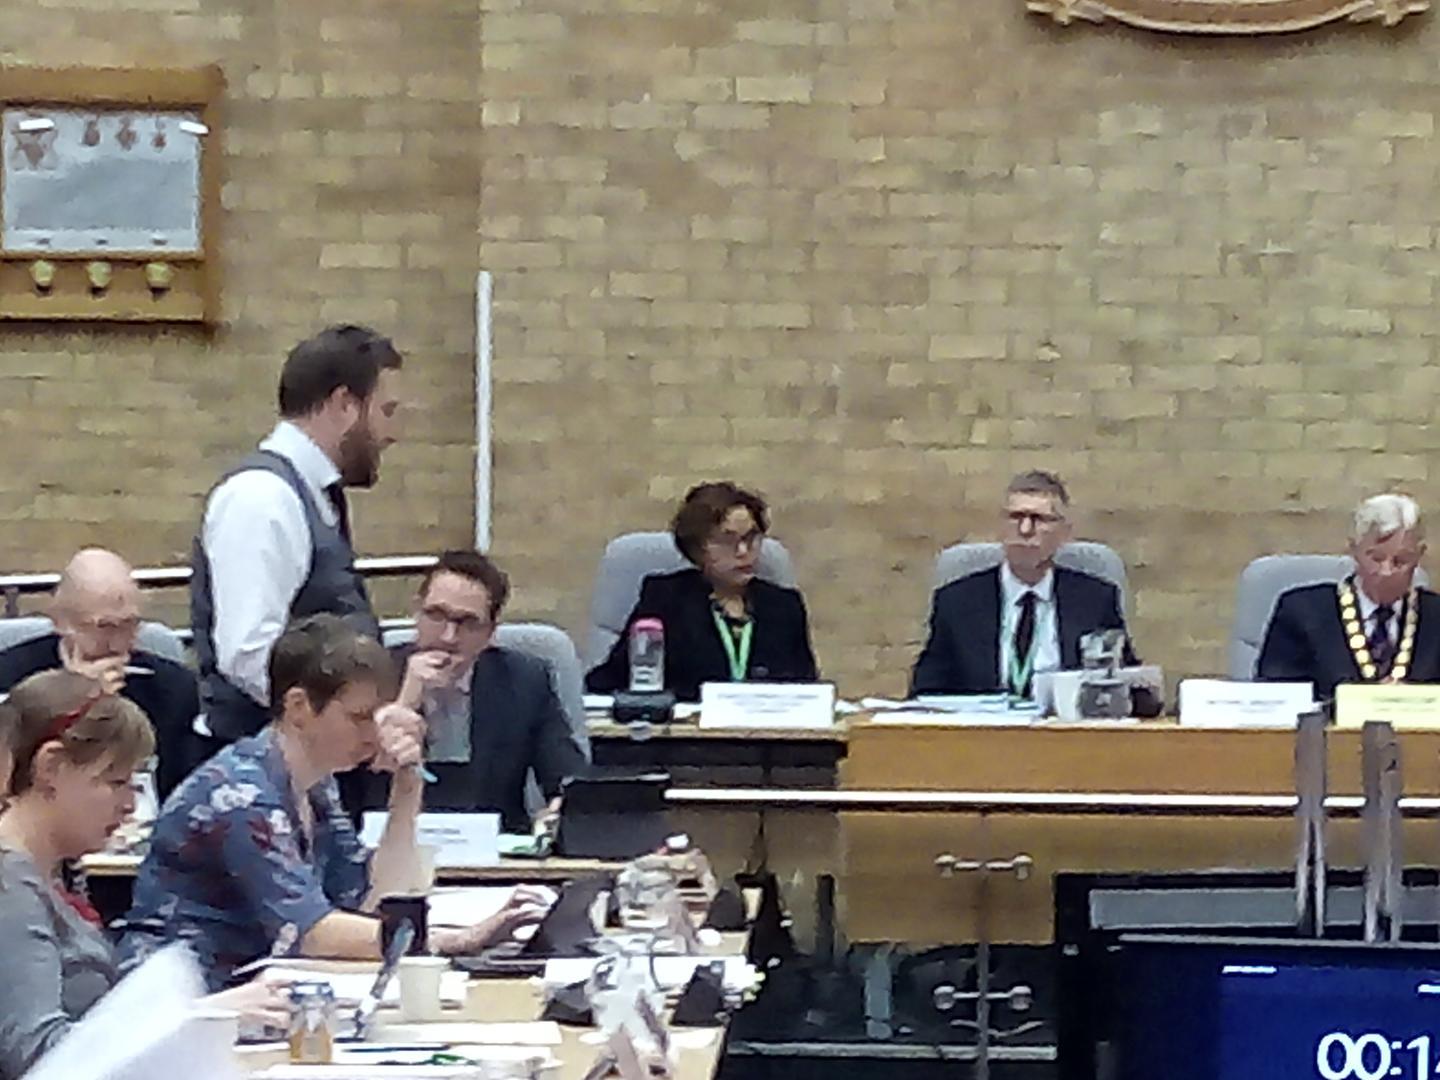 The council leader proposed Milton Keynes Councils 200million revenue budget, with an increase of 3.49 per cent for the council tax. The borough's council tax is added to amounts demanded by the police, fire service and parish councils to make up the final bill.